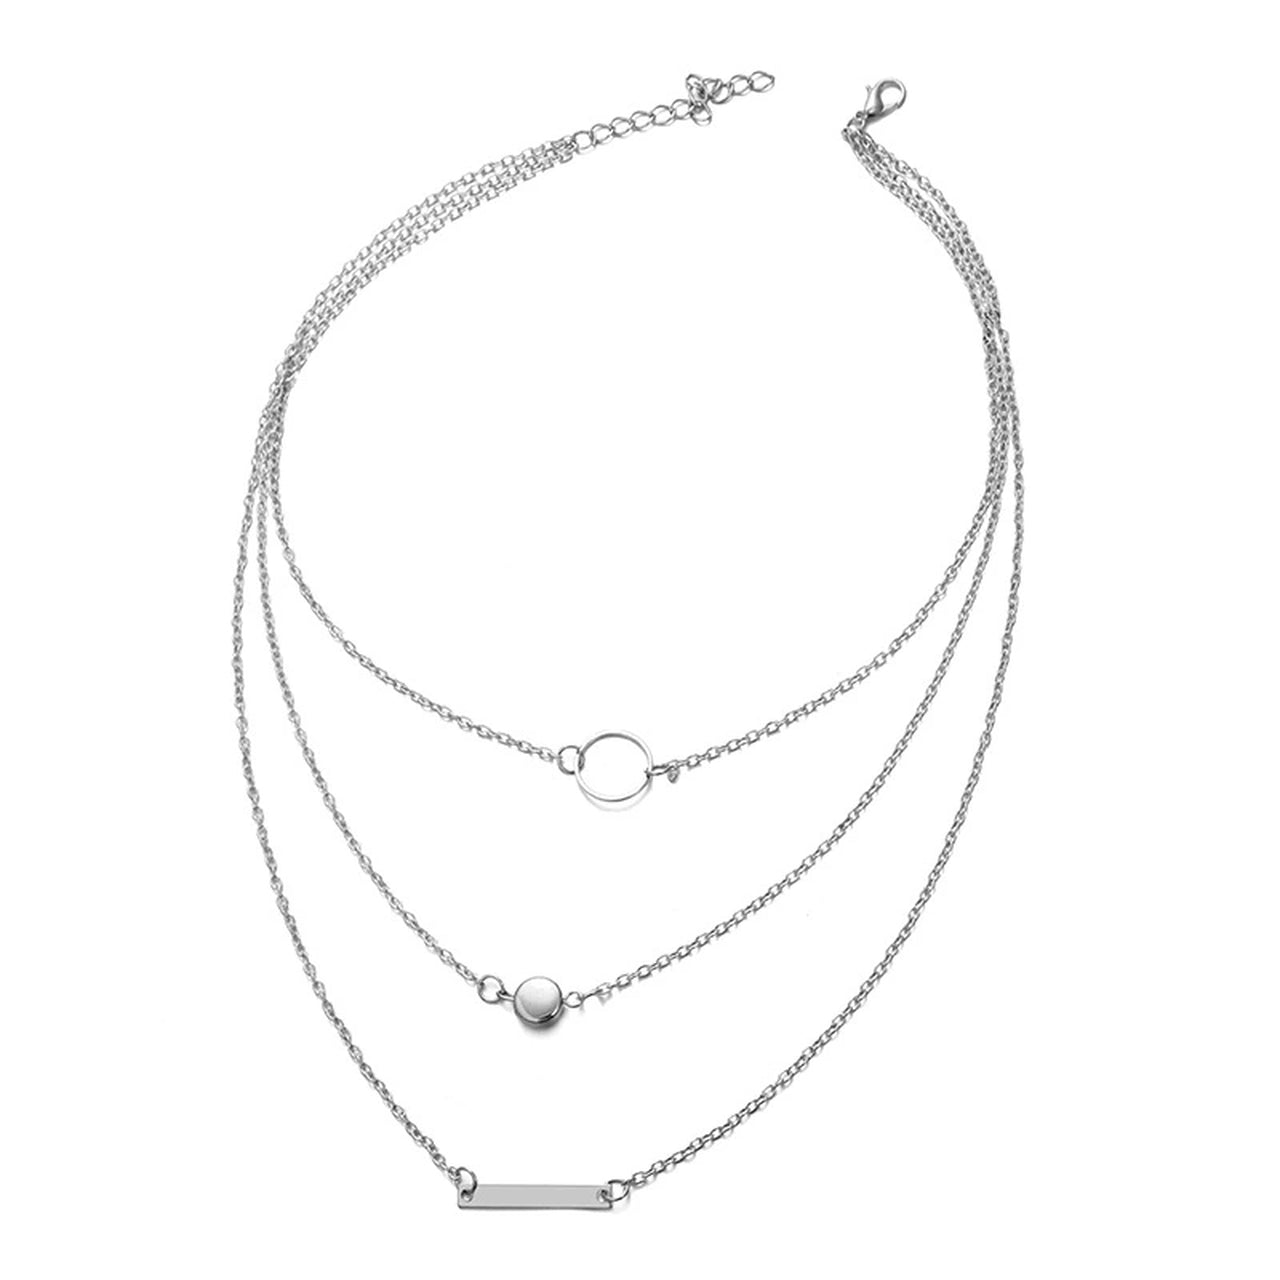 LAYERED 3 PIECE NECKLACE SILVER - WESTERN STYLIN'